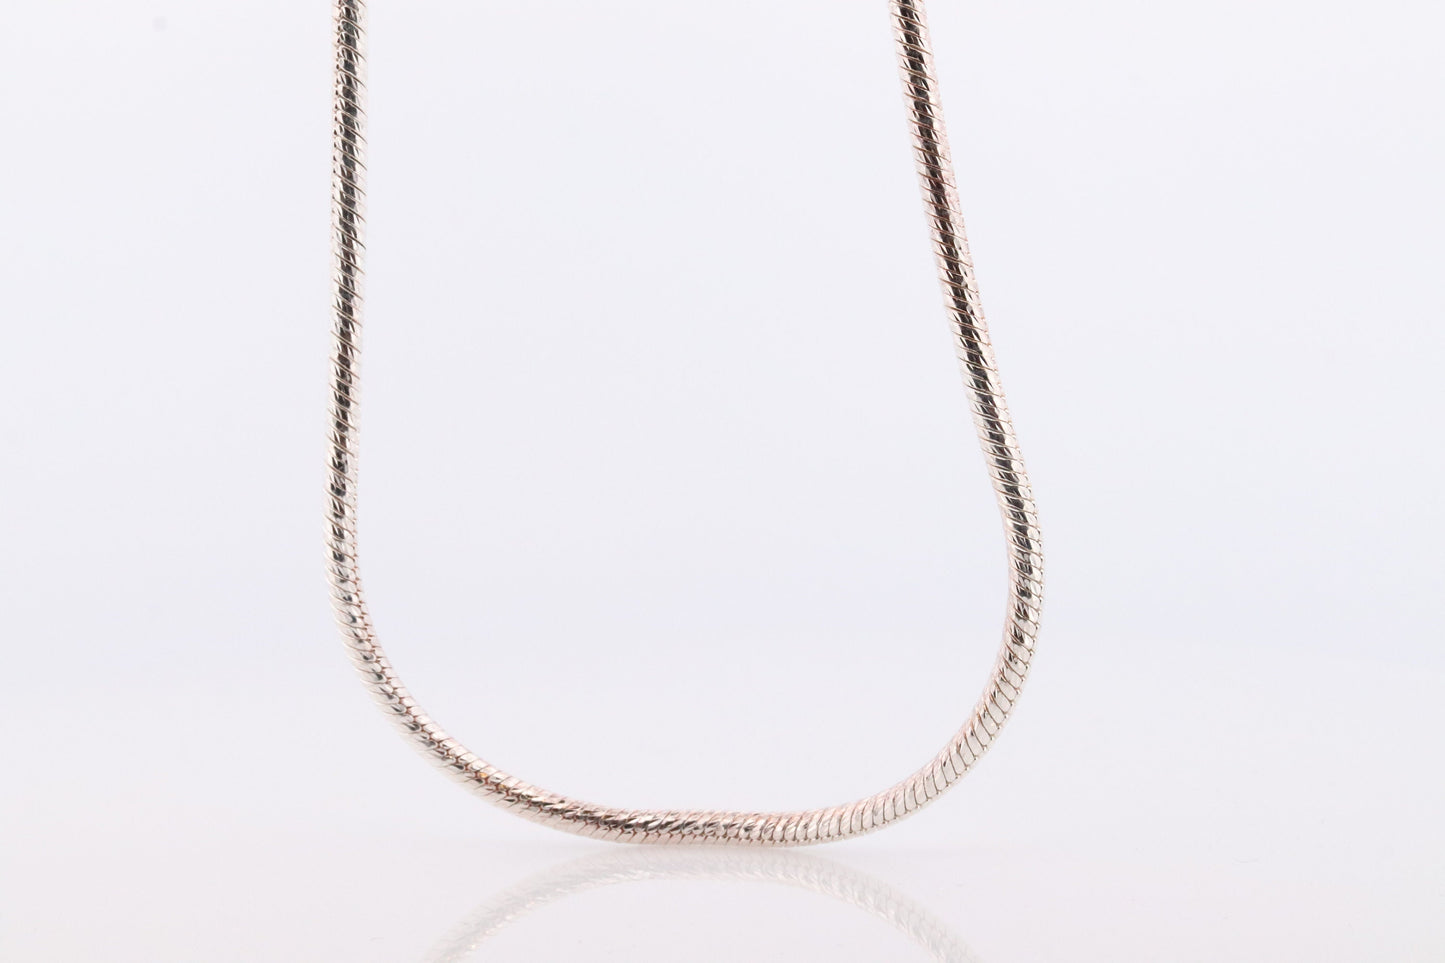 Sterling Silver Omega Snake Necklace. 925 Round Omega Snake Chain Heavy 45g 3mm width and 32in length